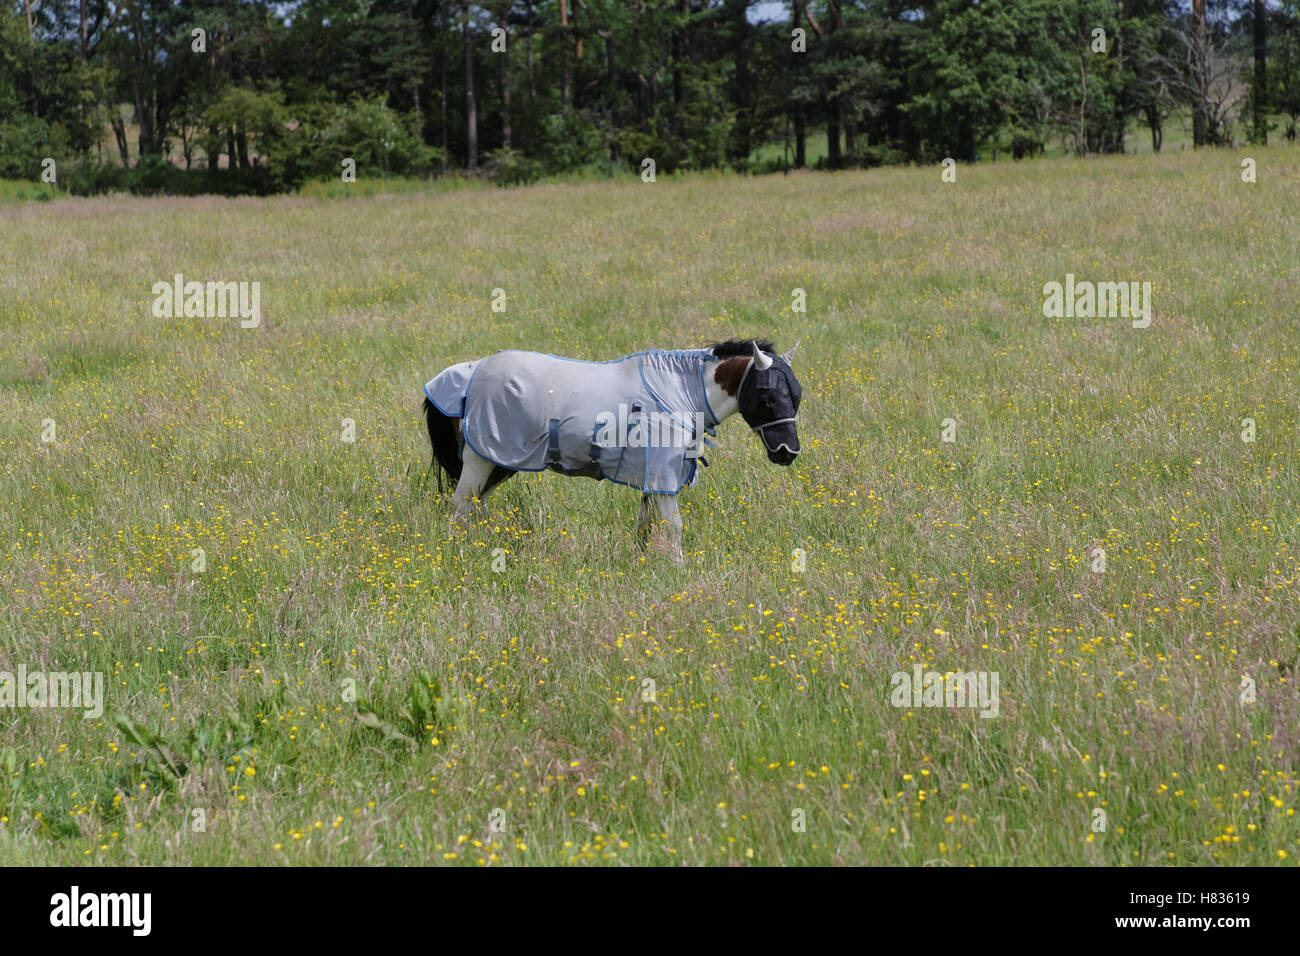 Horse in a field  with outdoor waterproofs Stock Photo